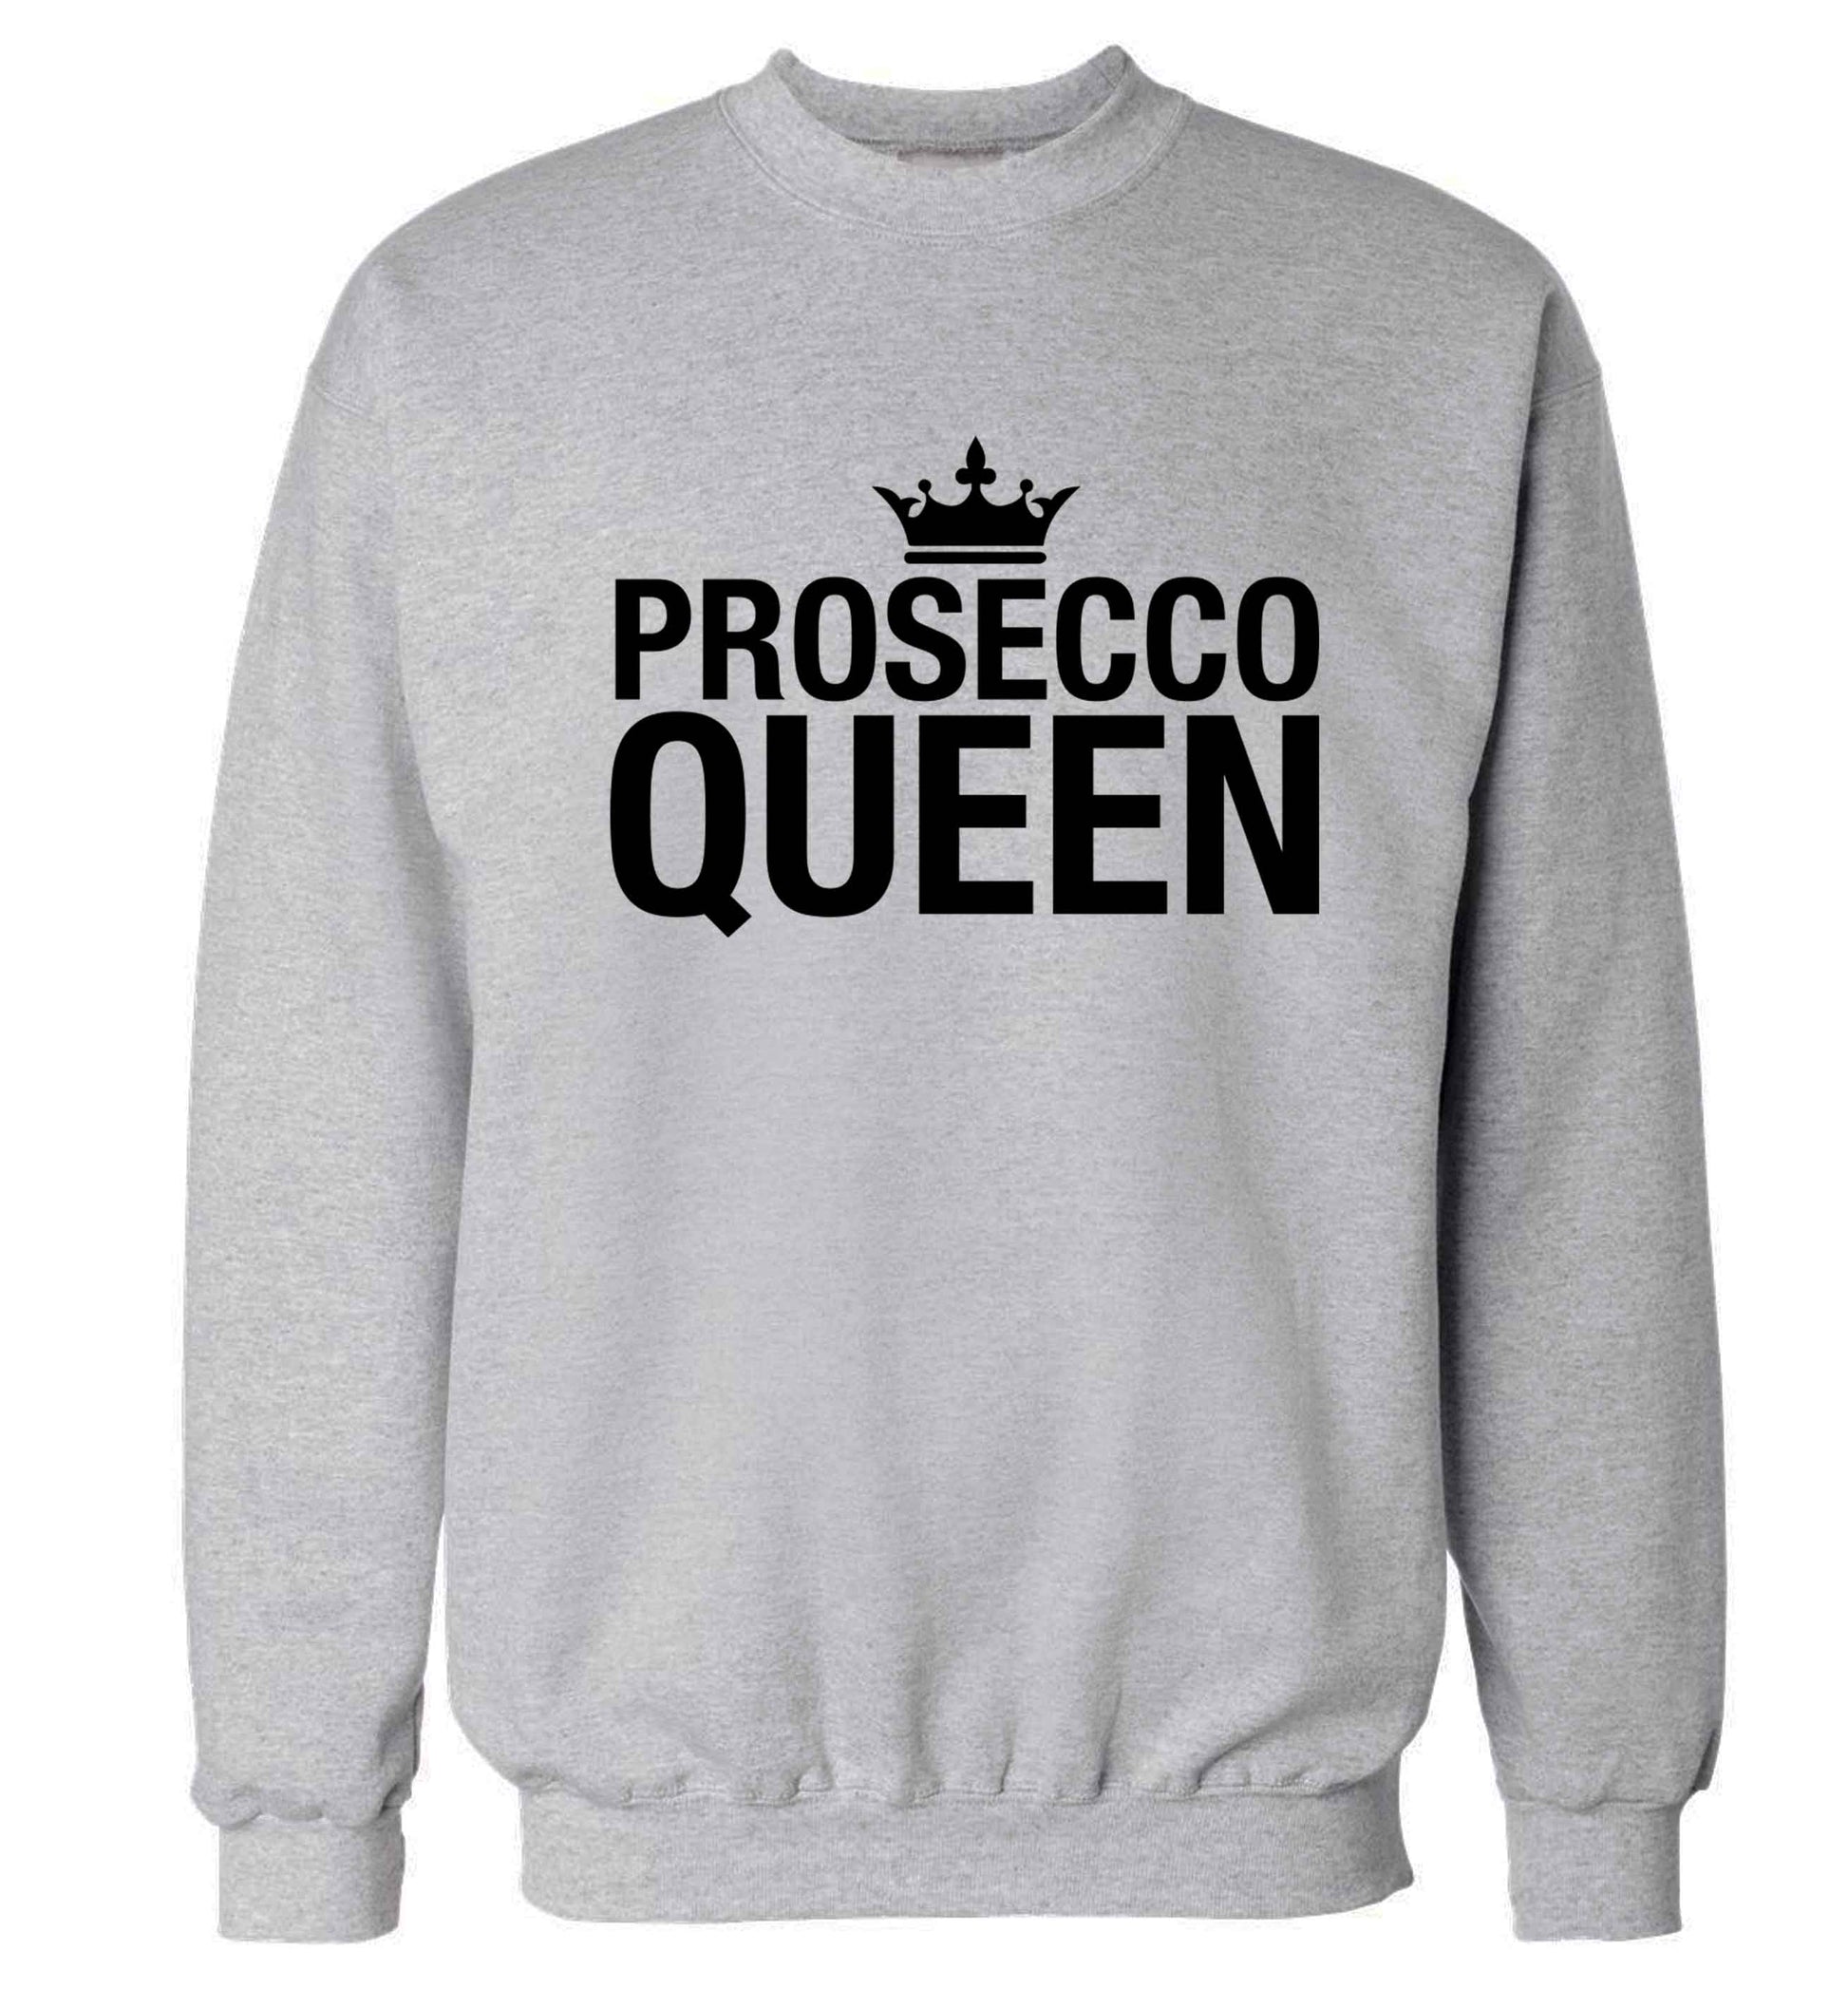 Prosecco queen Adult's unisex grey Sweater 2XL